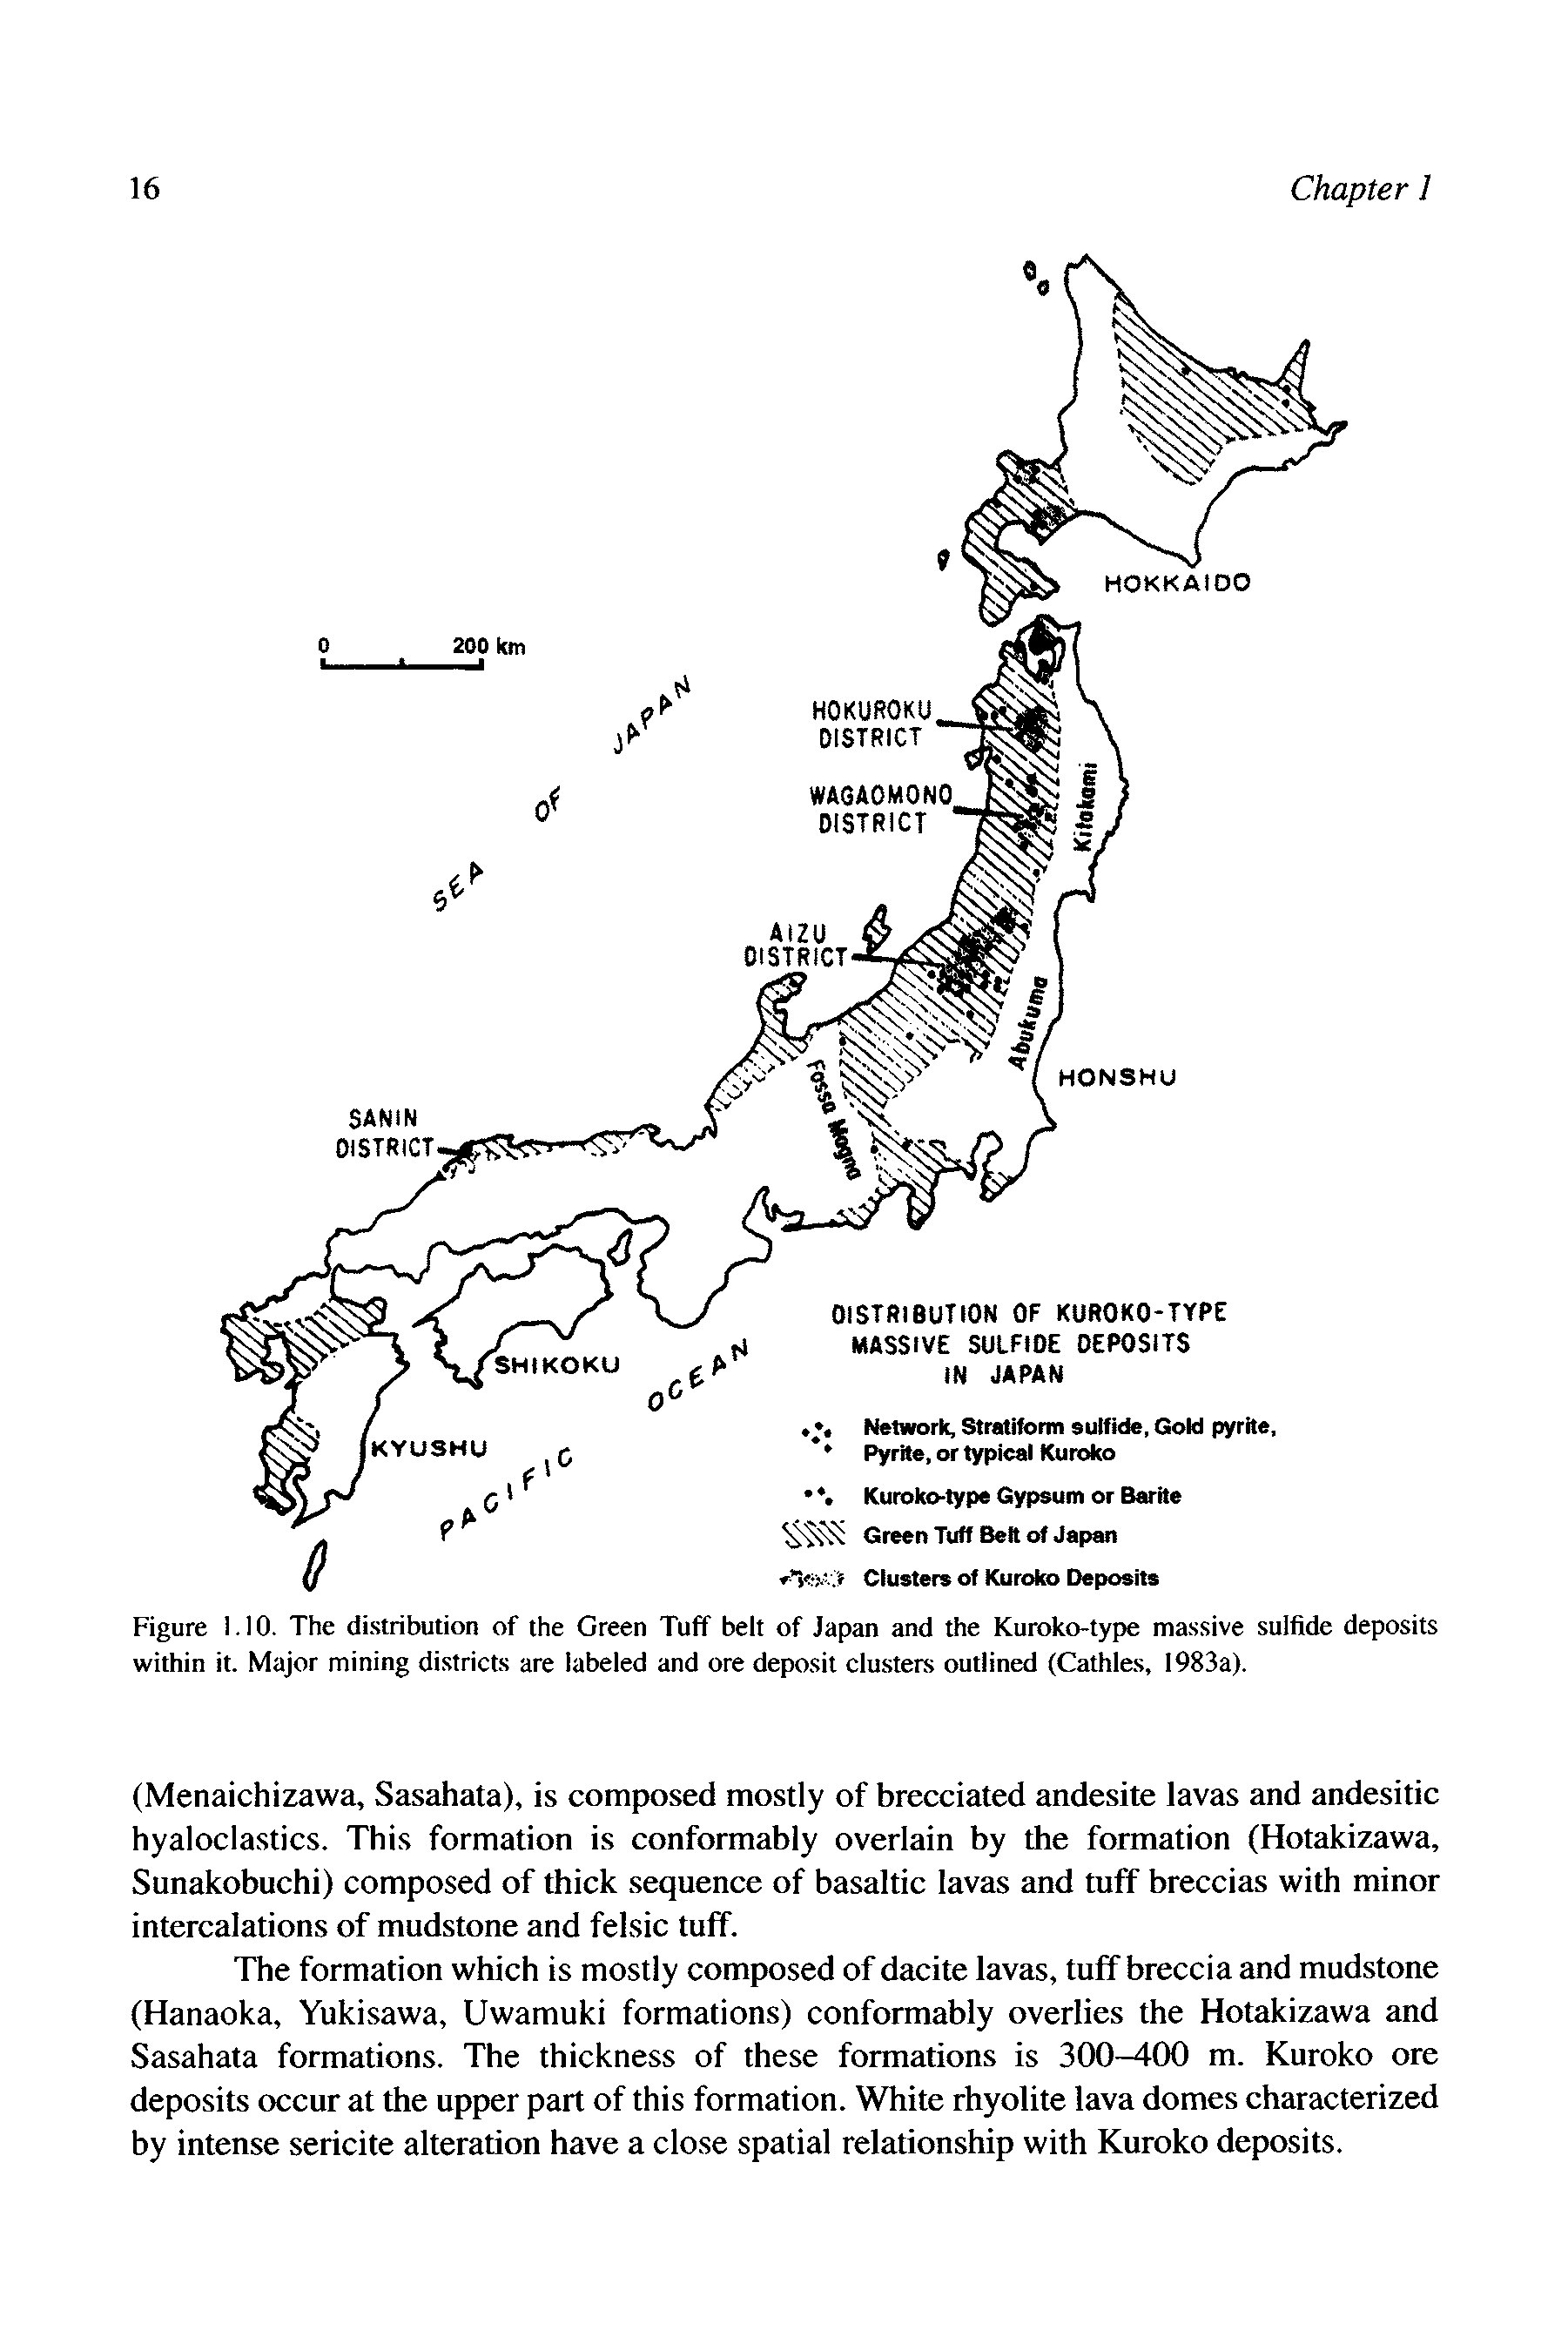 Figure 1.10. The distribution of the Green Tuff belt of Japan and the Kuroko-type massive sulfide deposits within it. Major mining districts are labeled and ore deposit clusters outlined (Cathles, 1983a).